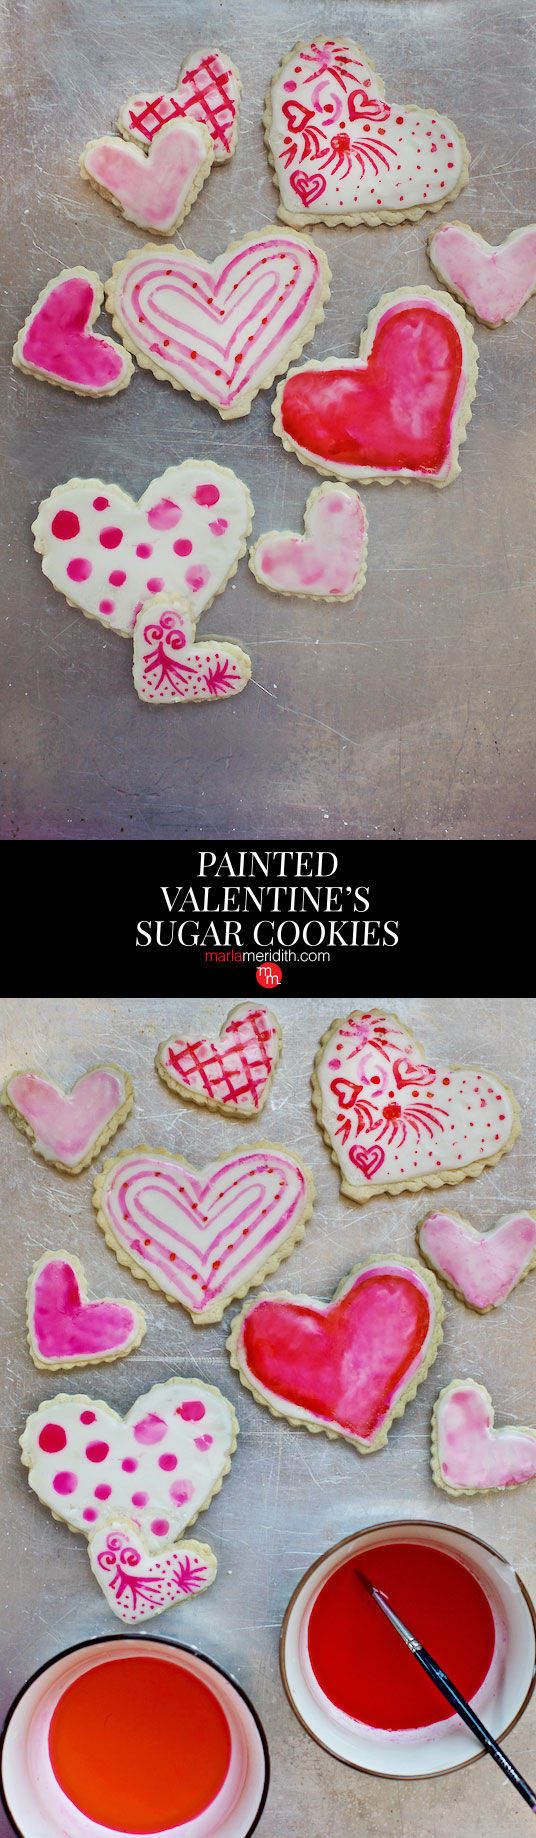 Painted Valentine's Sugar Cookies. Decorate with all kids of fun designs! MarlaMeridith.com ( @marlameridith 0